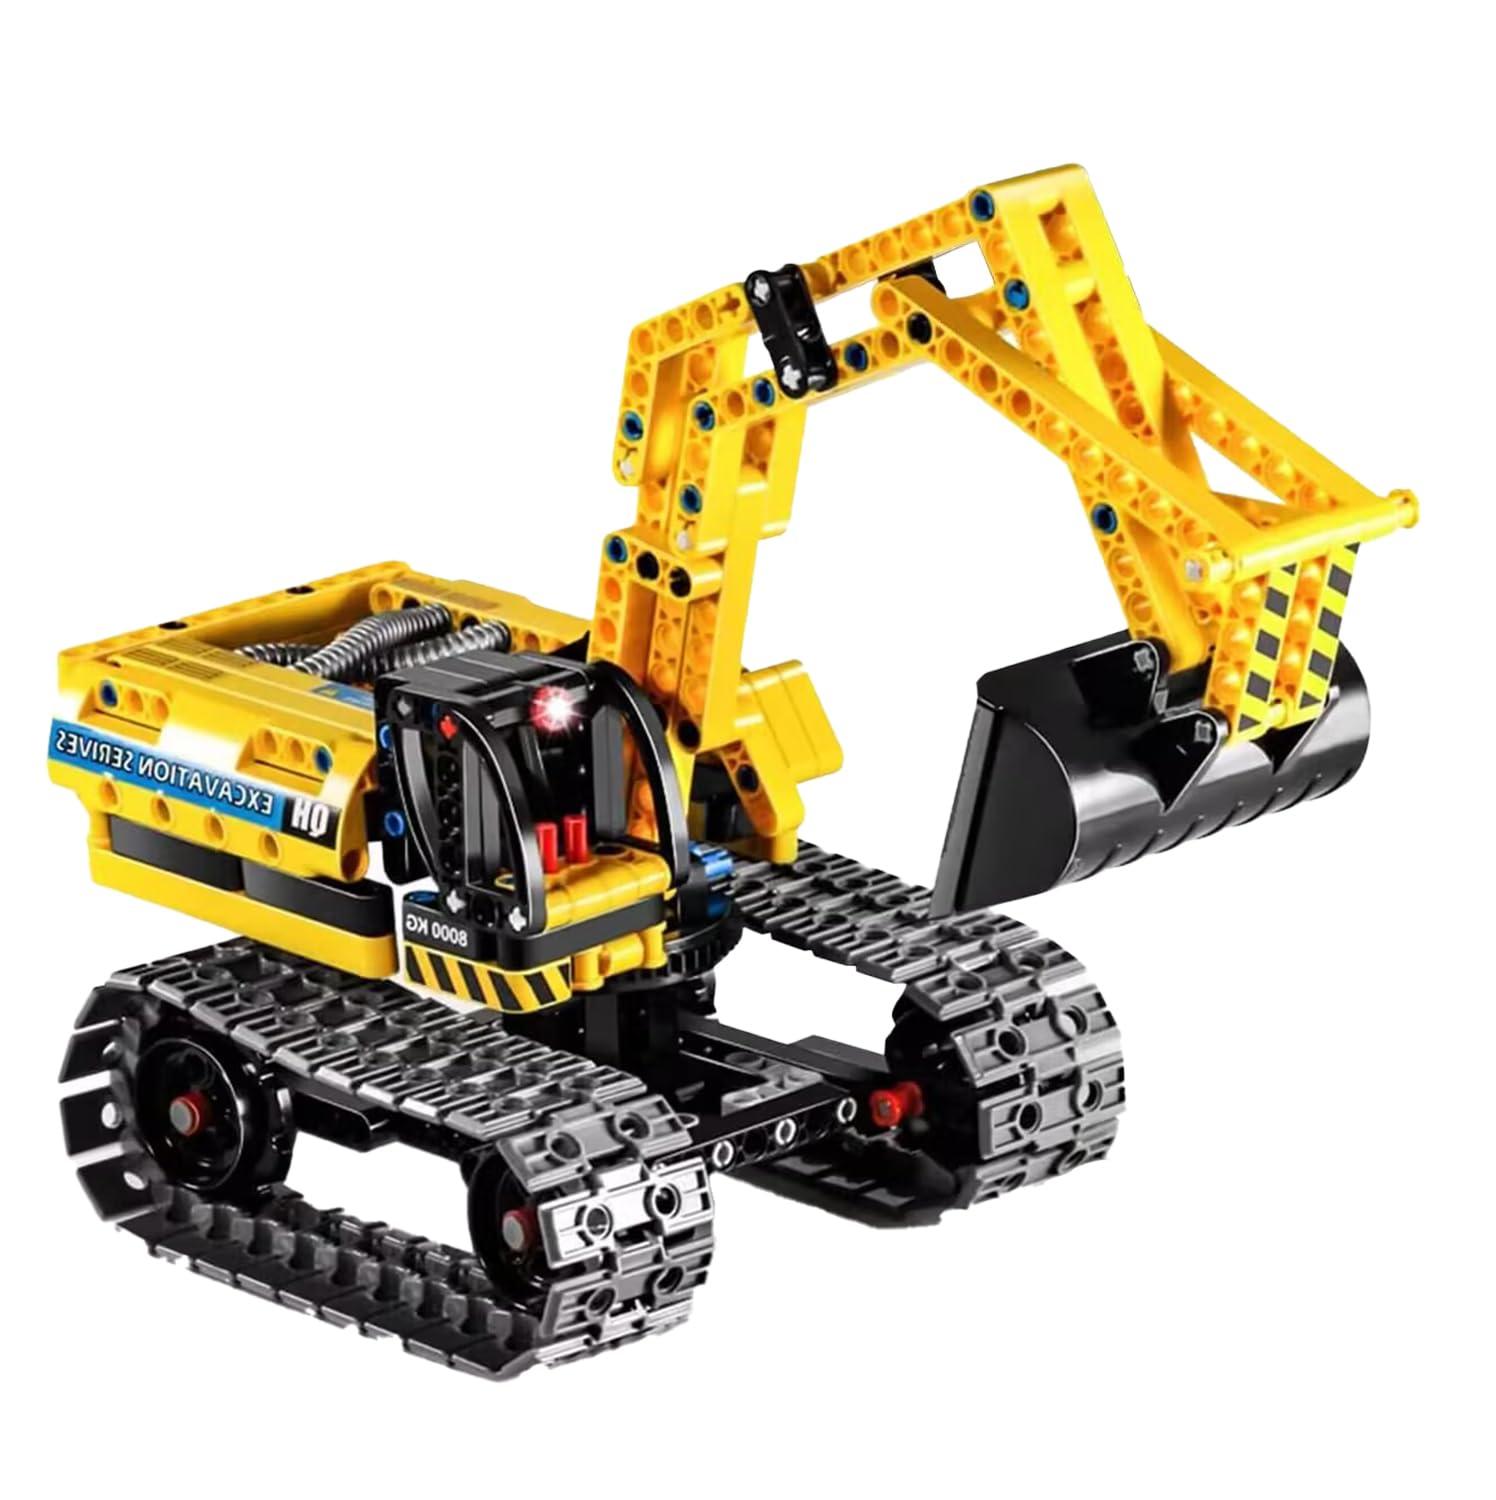 OKKIDY Building Toys Sets Excavators Robot 2-in-1, Technic Building Blocks, 342 PCS STEM Building Blocks Crane Toy Crawler Excavator & Robot Gift for Children 6 7 8 9 10 Years Old